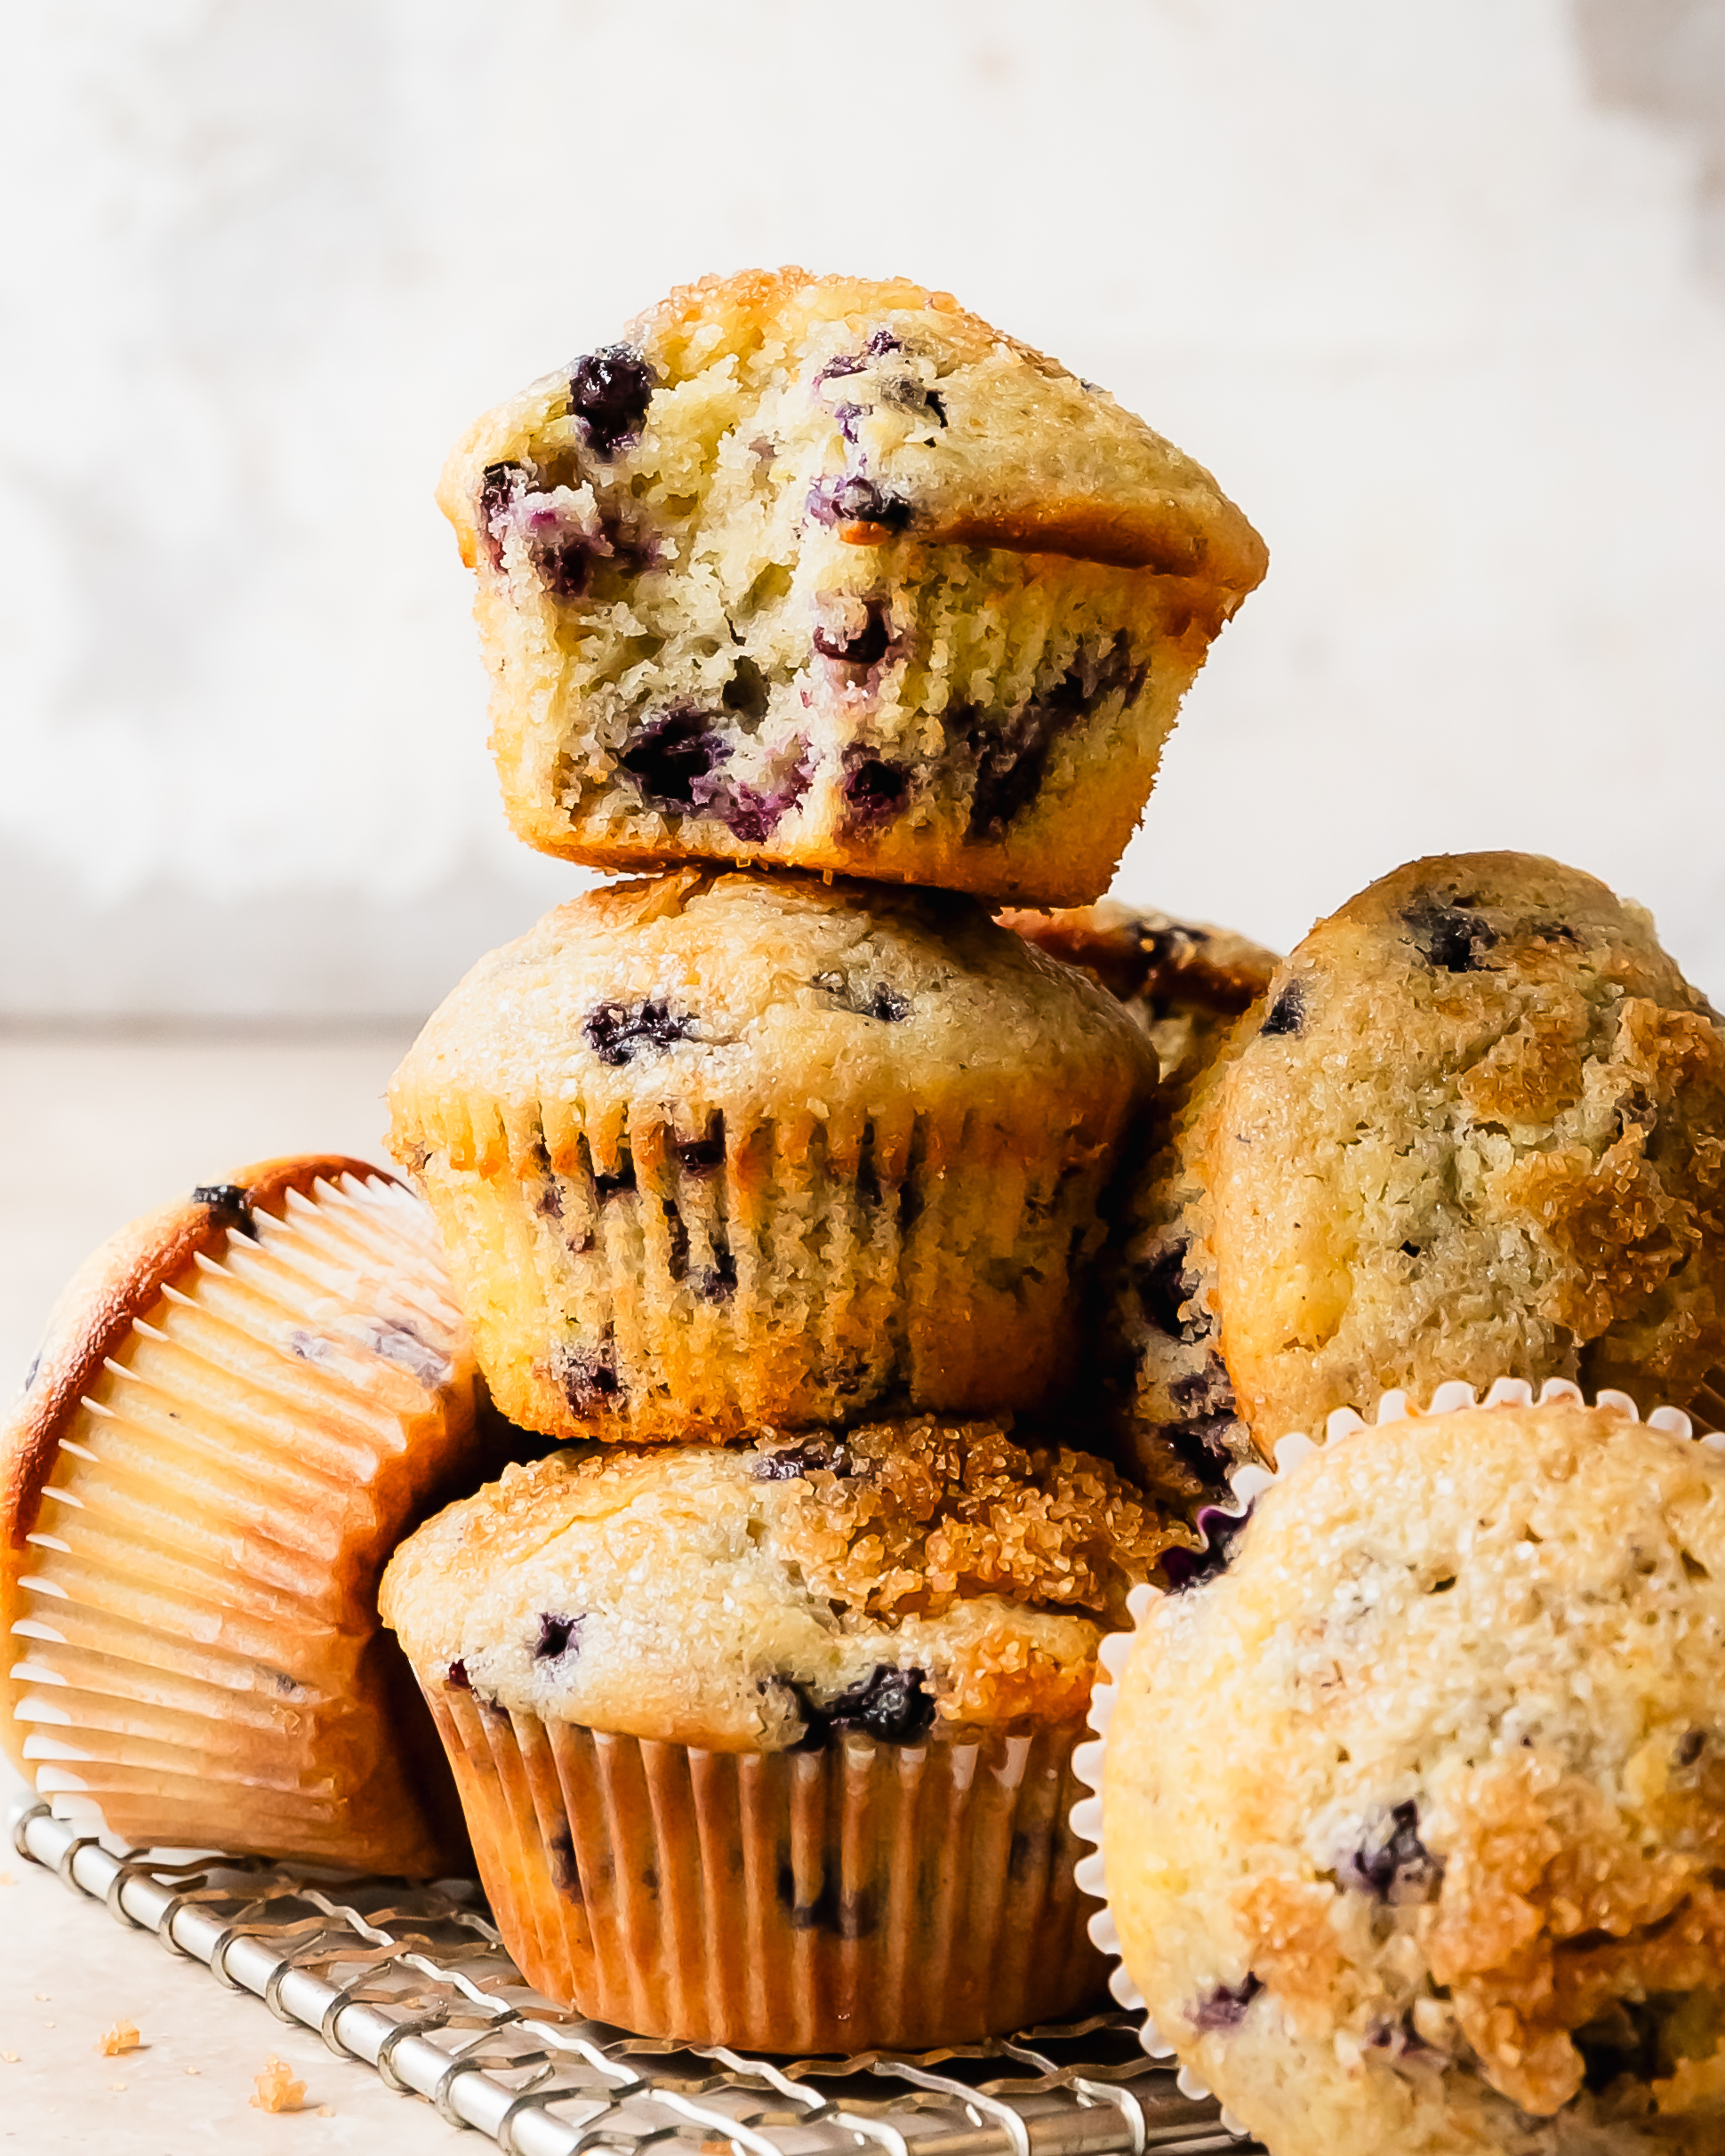 These buttermilk blueberry muffins are light, fluffy and incredibly moist buttermilk muffins filled with fresh blueberries. They’re bakery style muffins with beautiful tall, domed tops covered in crunchy bits of sparkling sugar. 